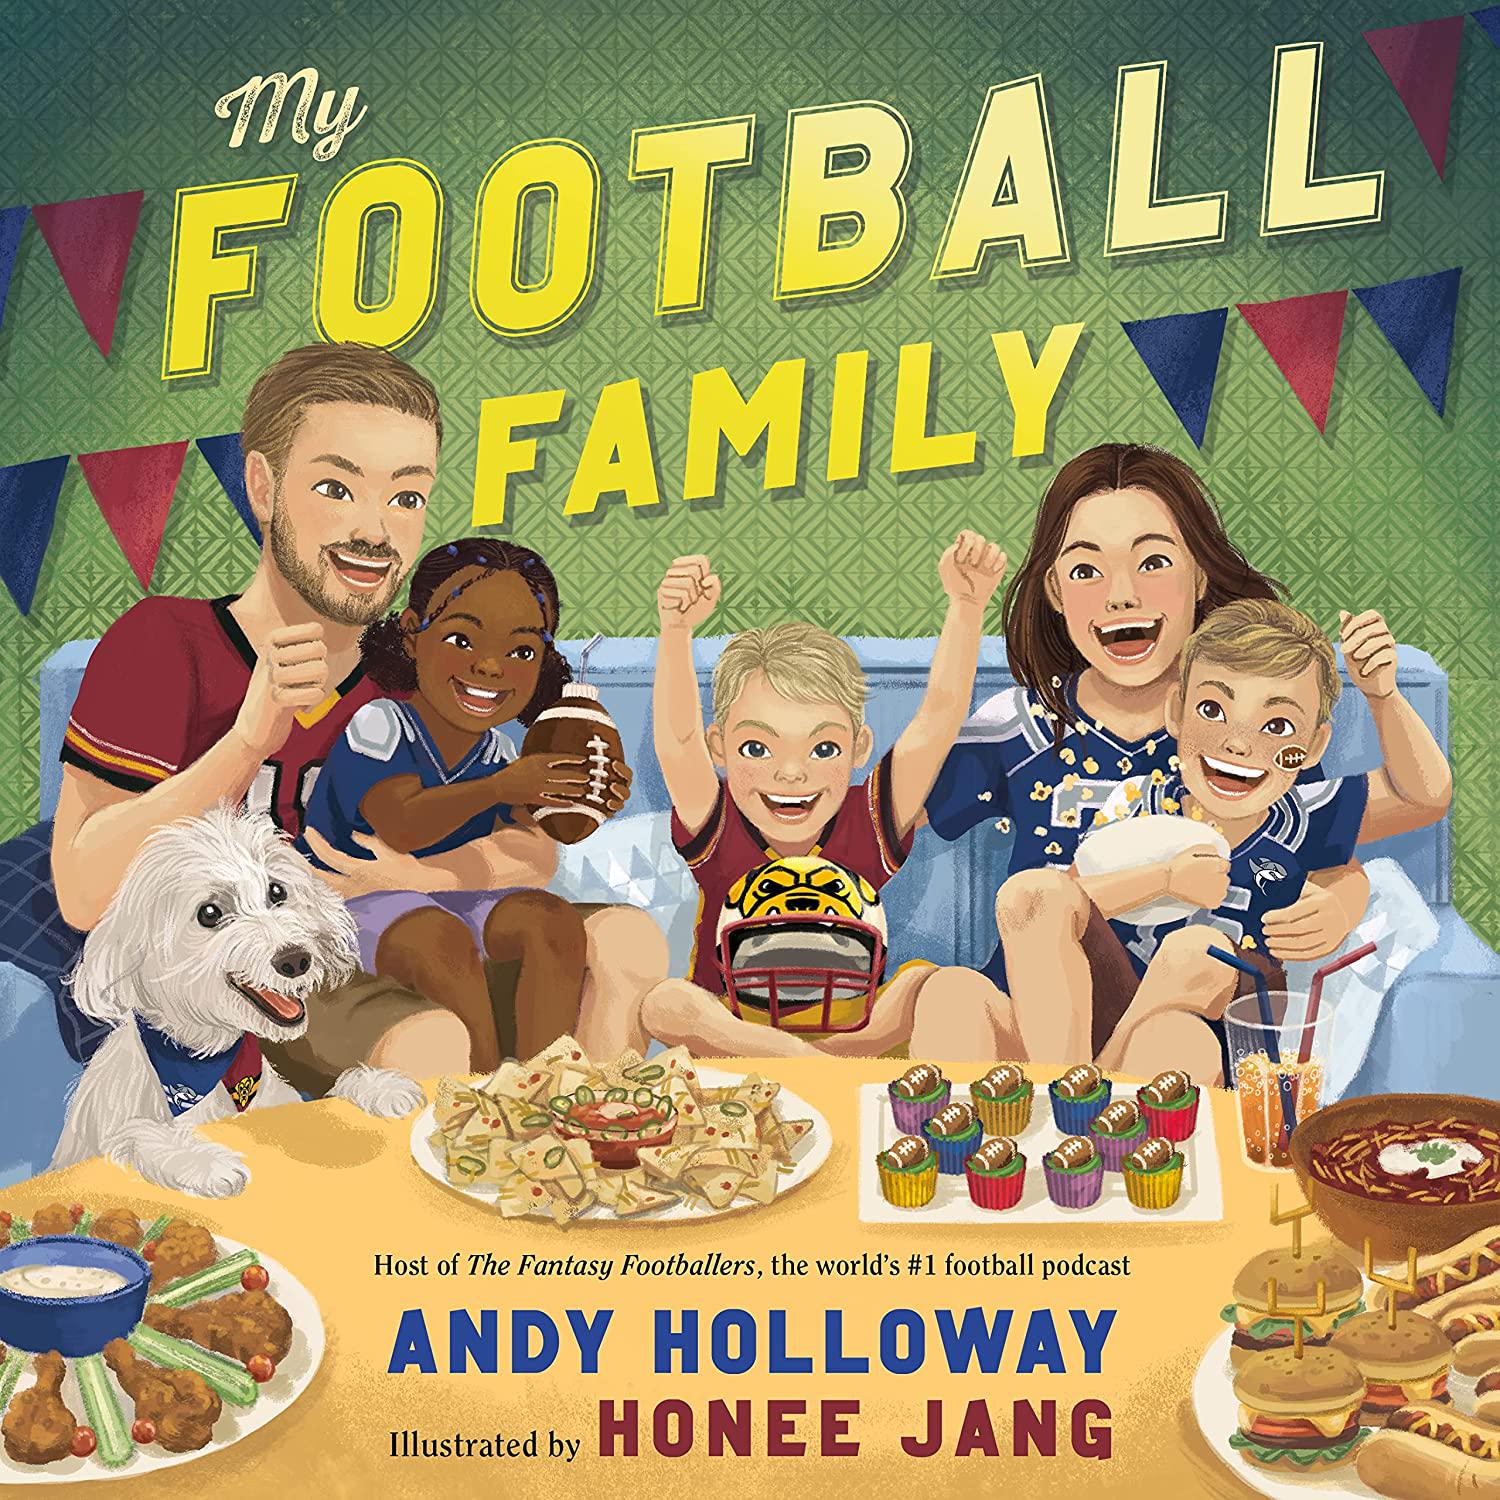 Andy Holloway and 1 more, My Football Family